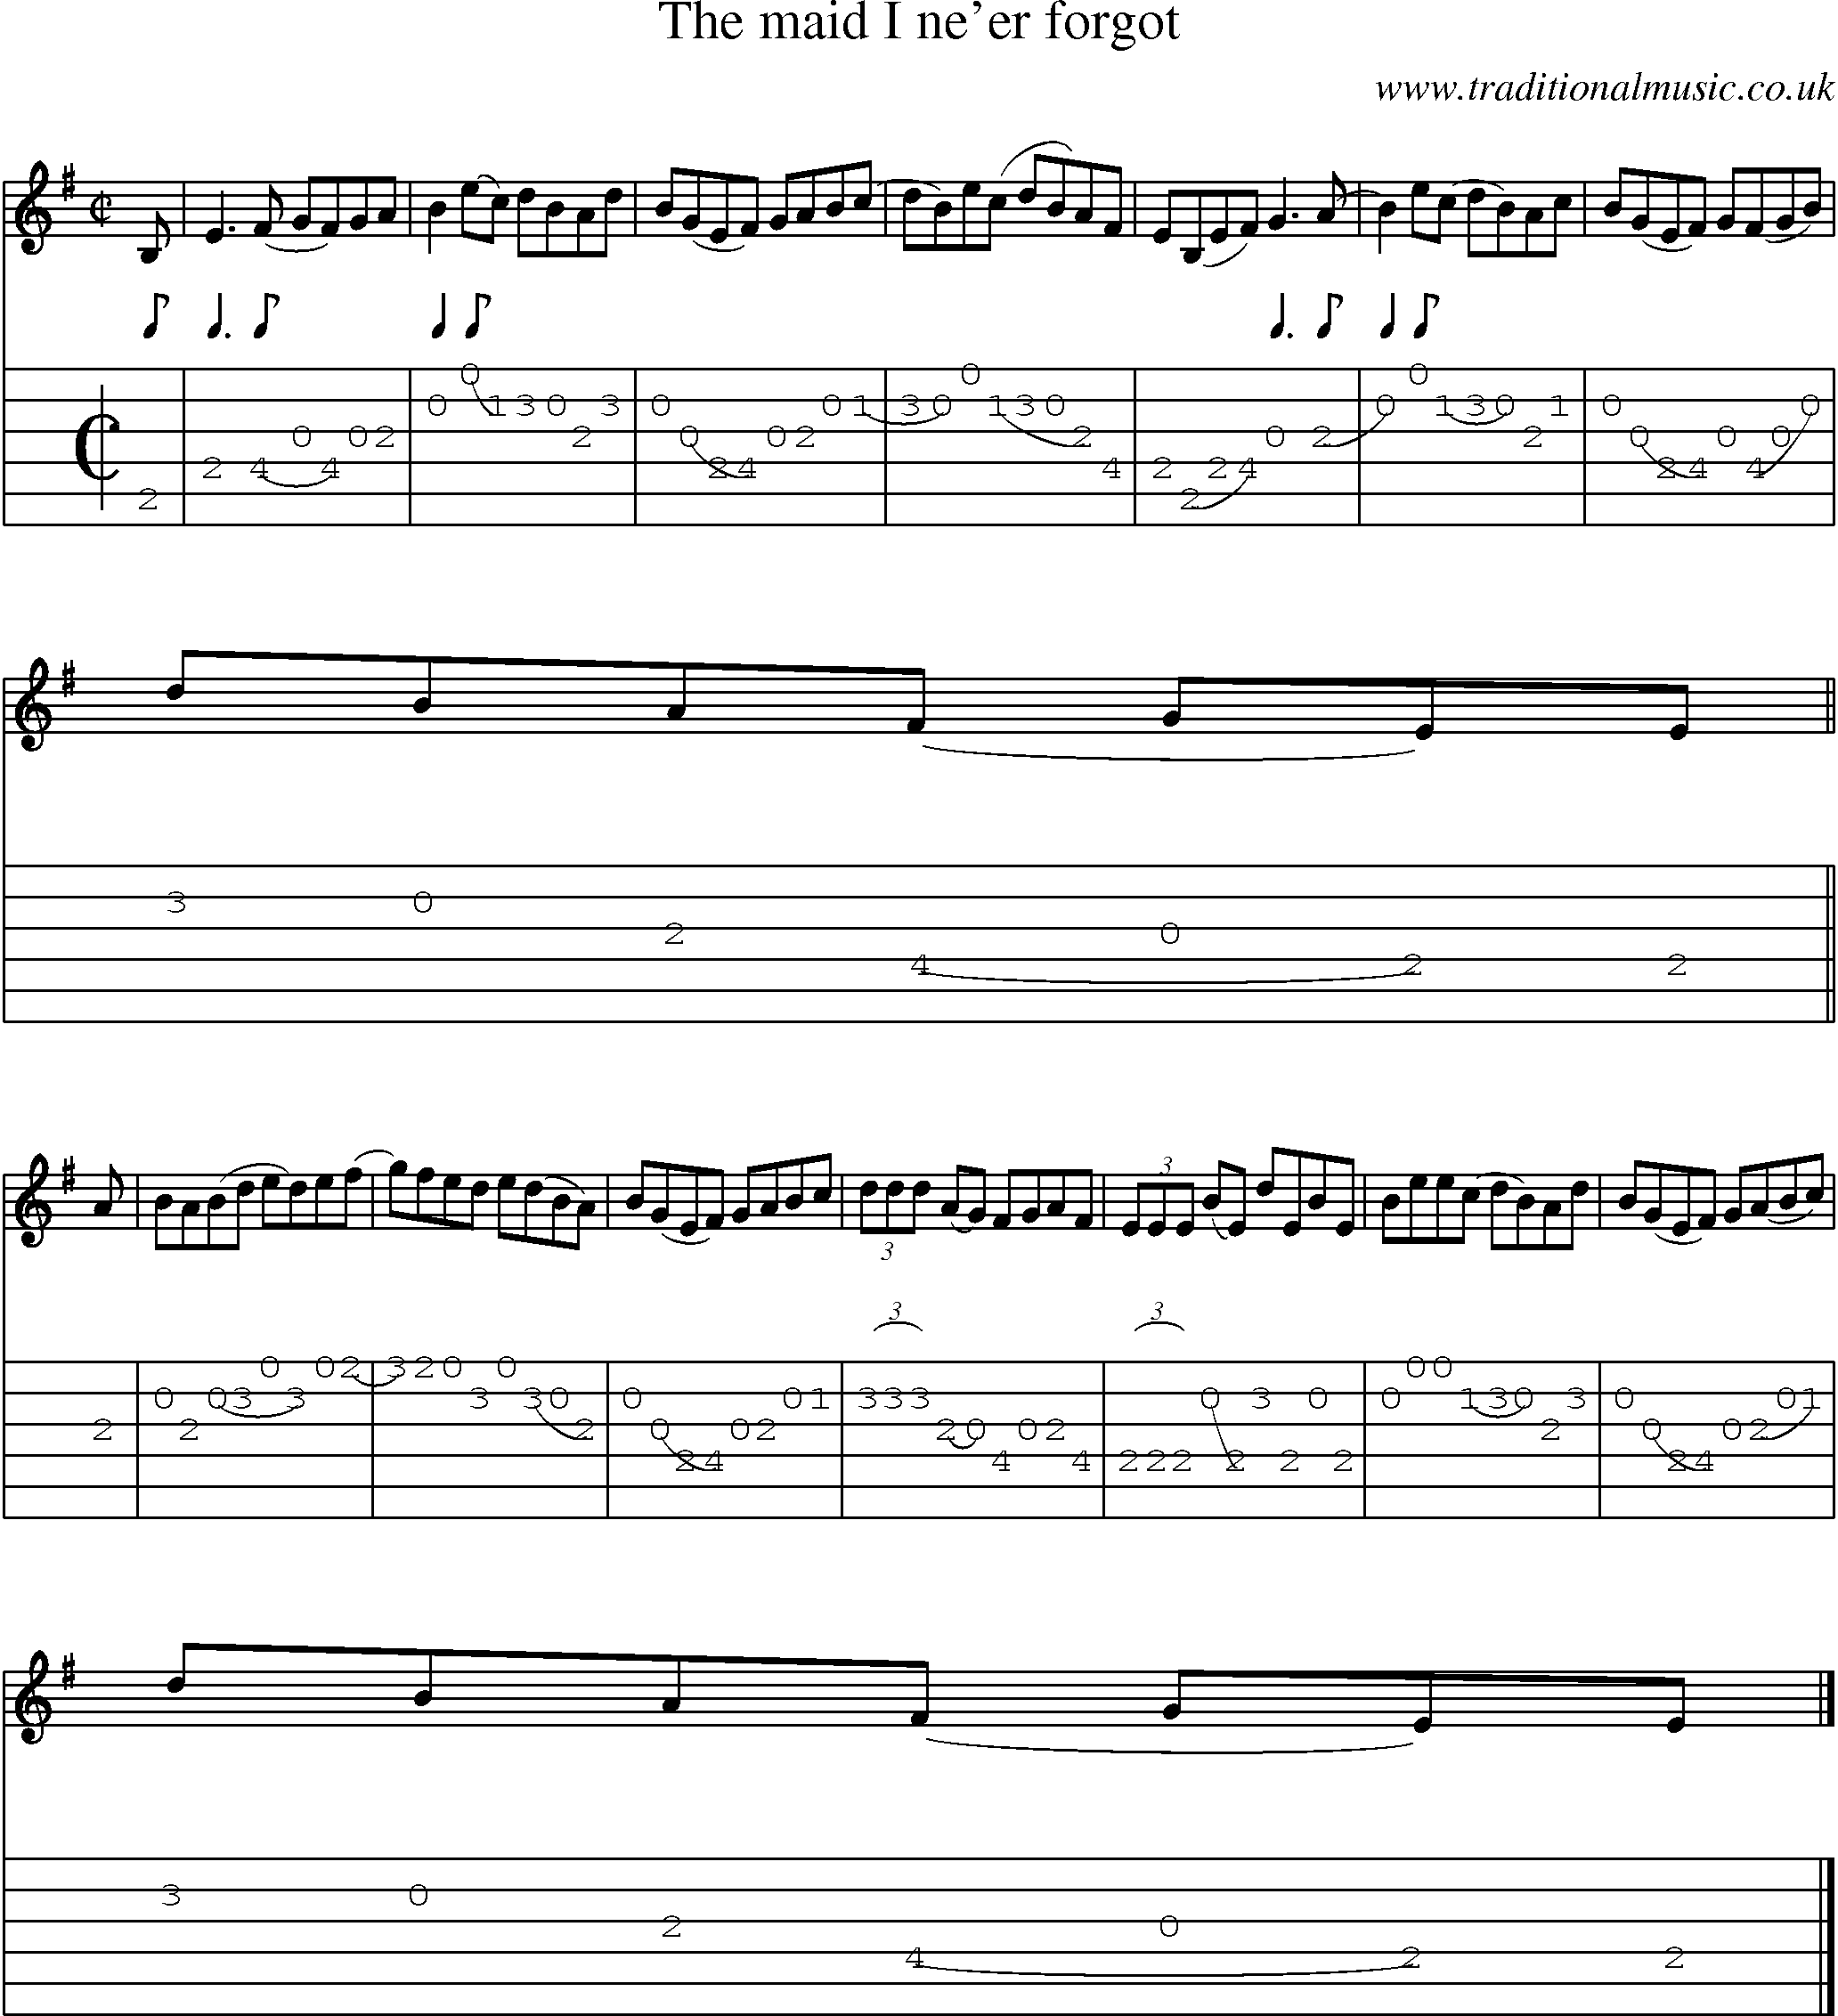 Music Score and Guitar Tabs for Maid I Neer Forgot